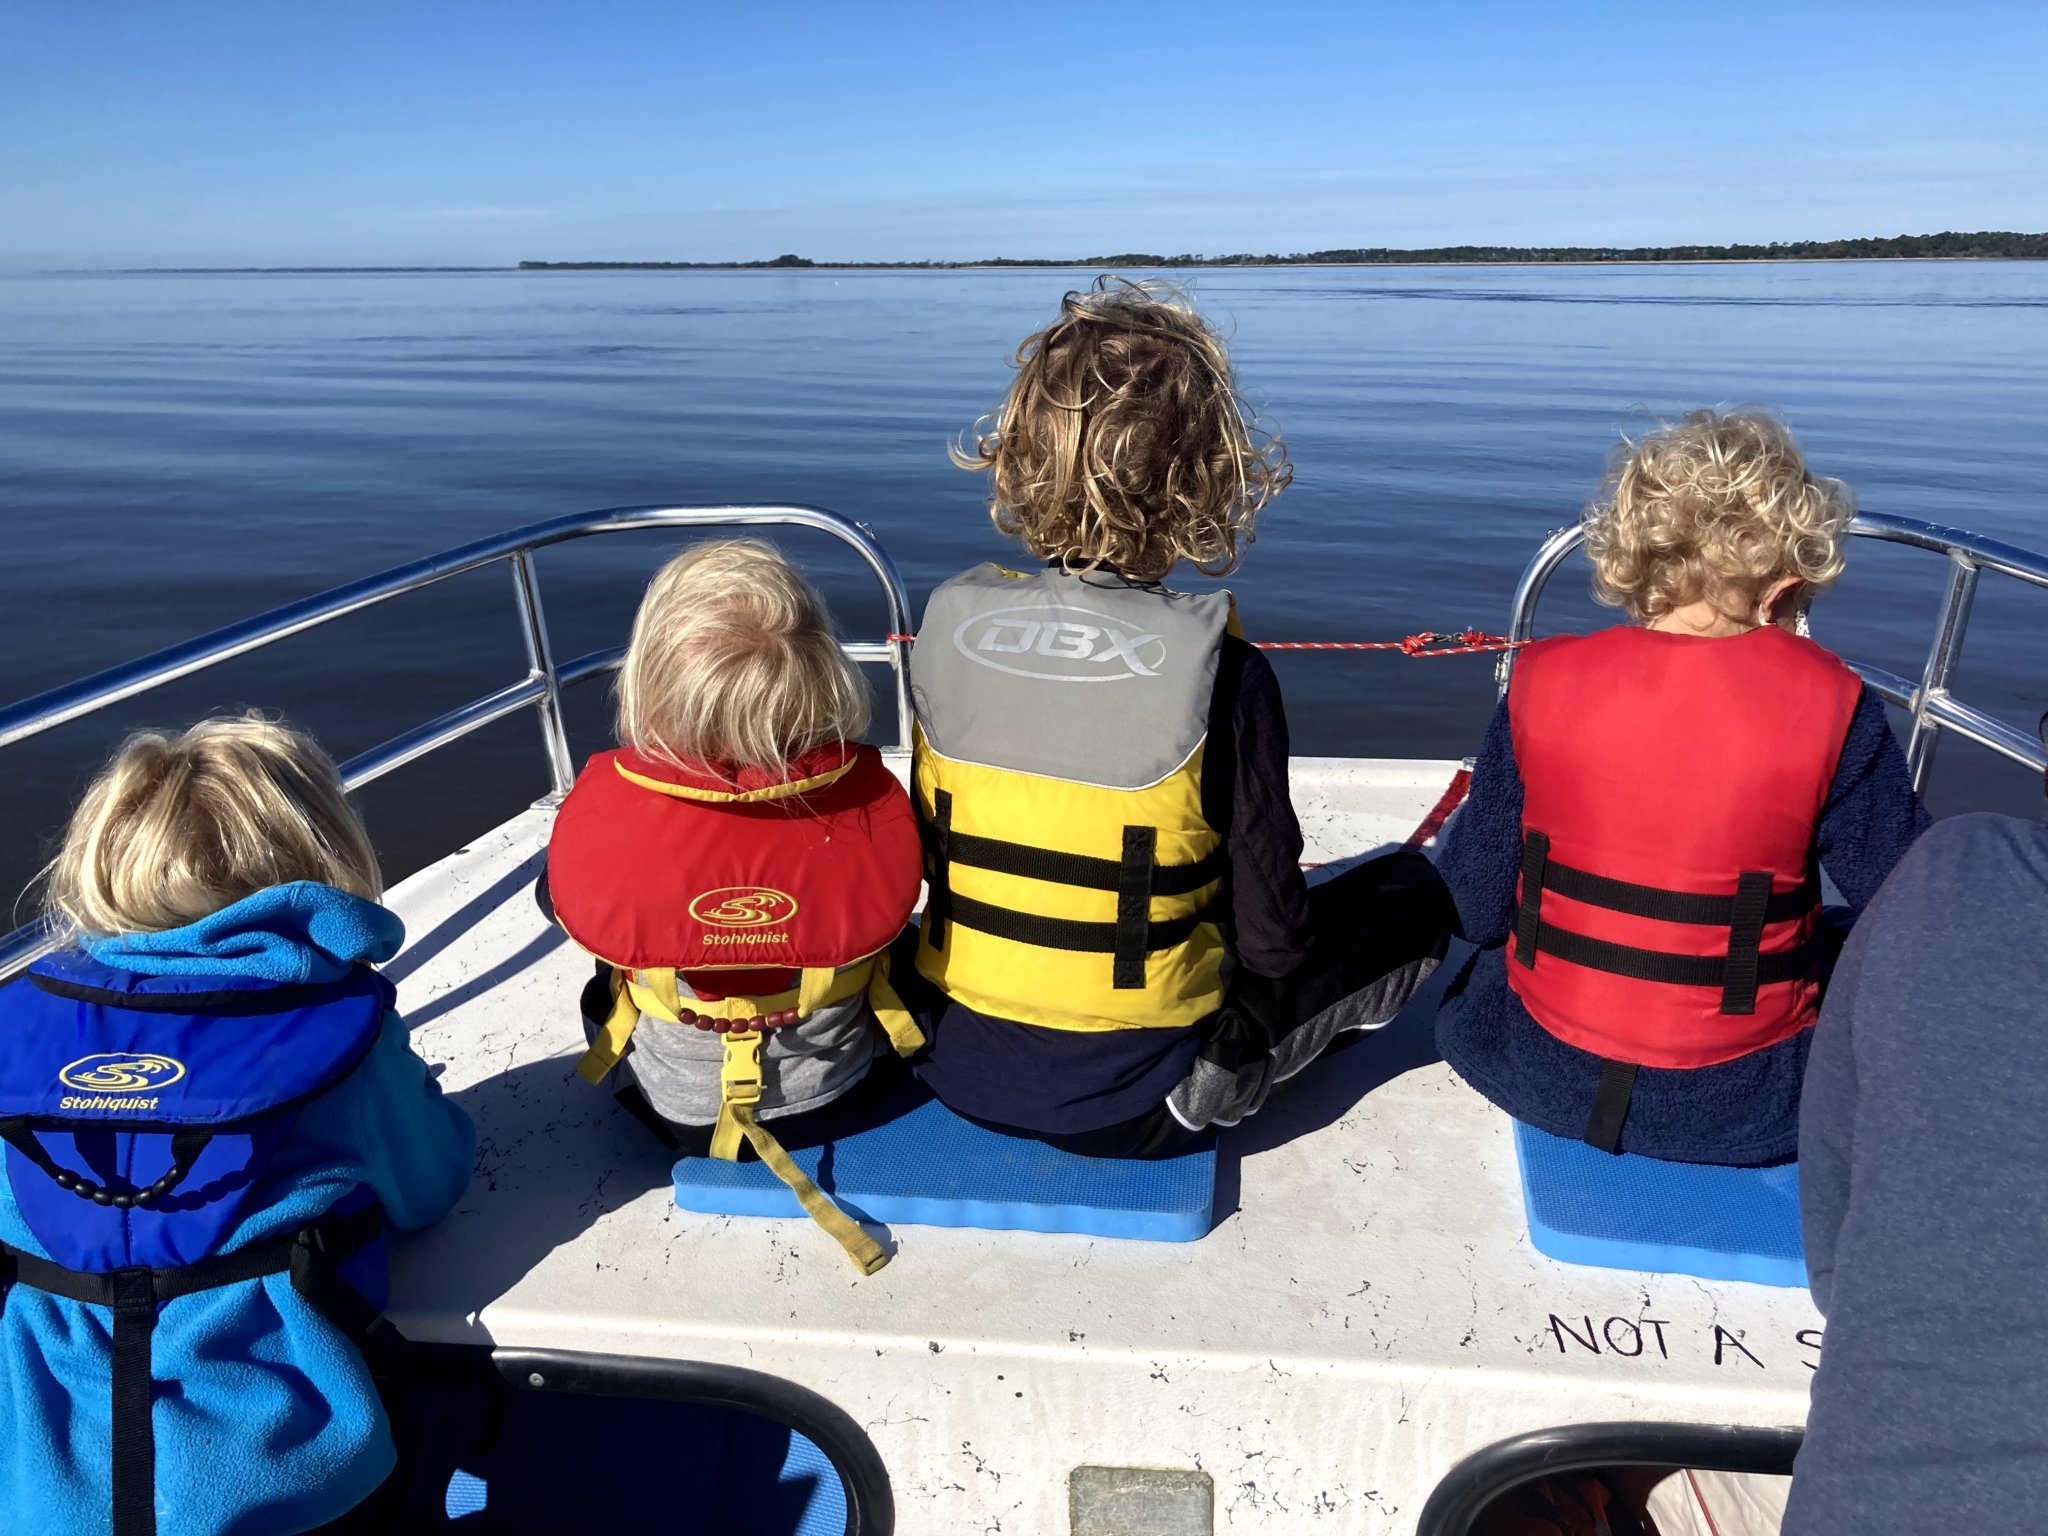 Four kids sitting on the edge of a boat with lifejackets on looking out at the water.